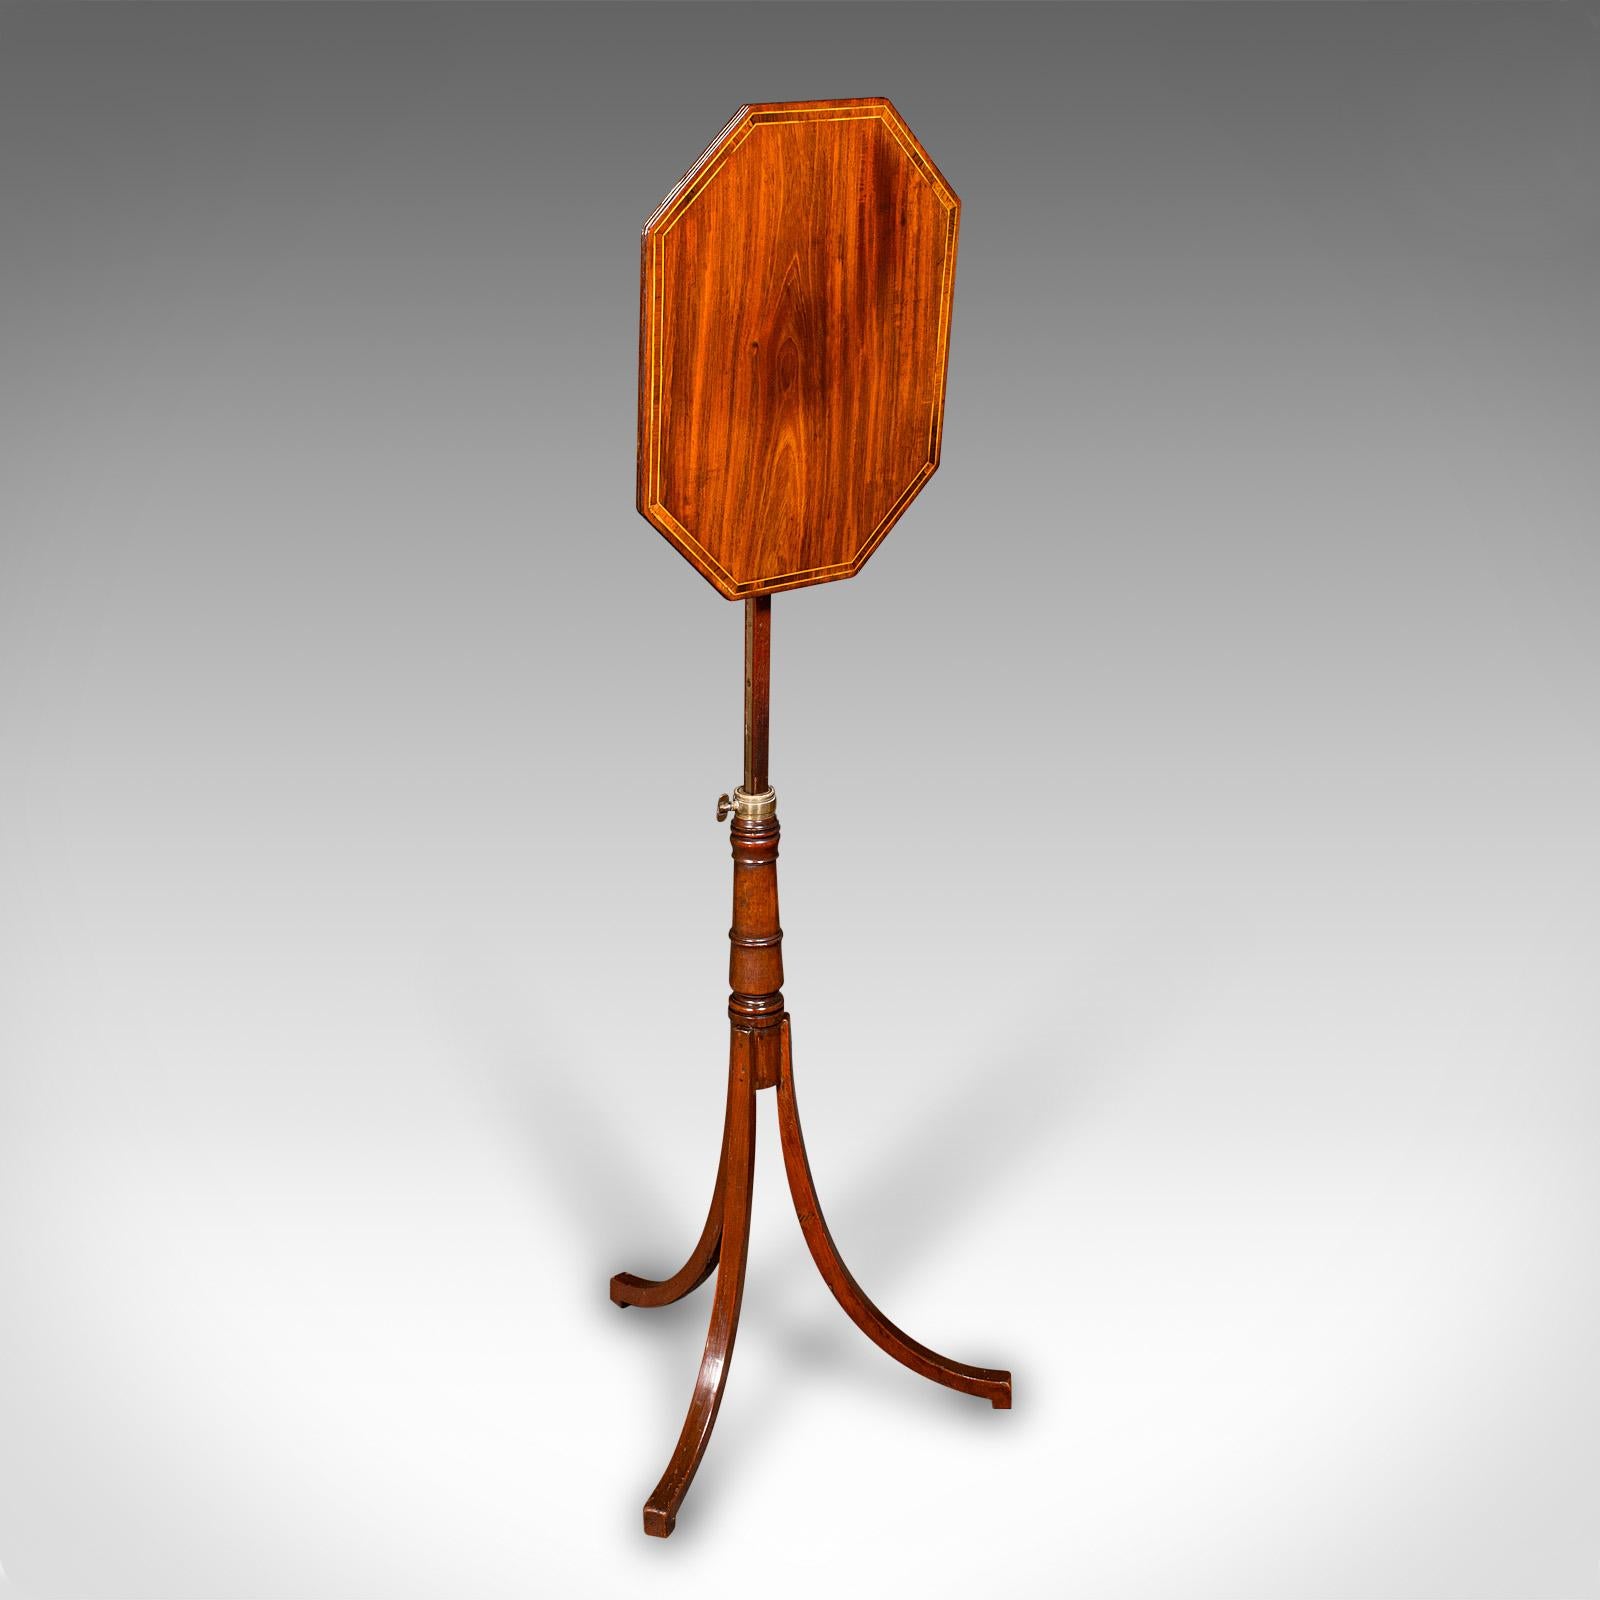 This is an antique metamorphic wine table. An English, mahogany tilt top side or lamp table, dating to the Regency period, circa 1820.

Elegant metamorphic table with superb figuring and colour
Displays a desirable aged patina and in good